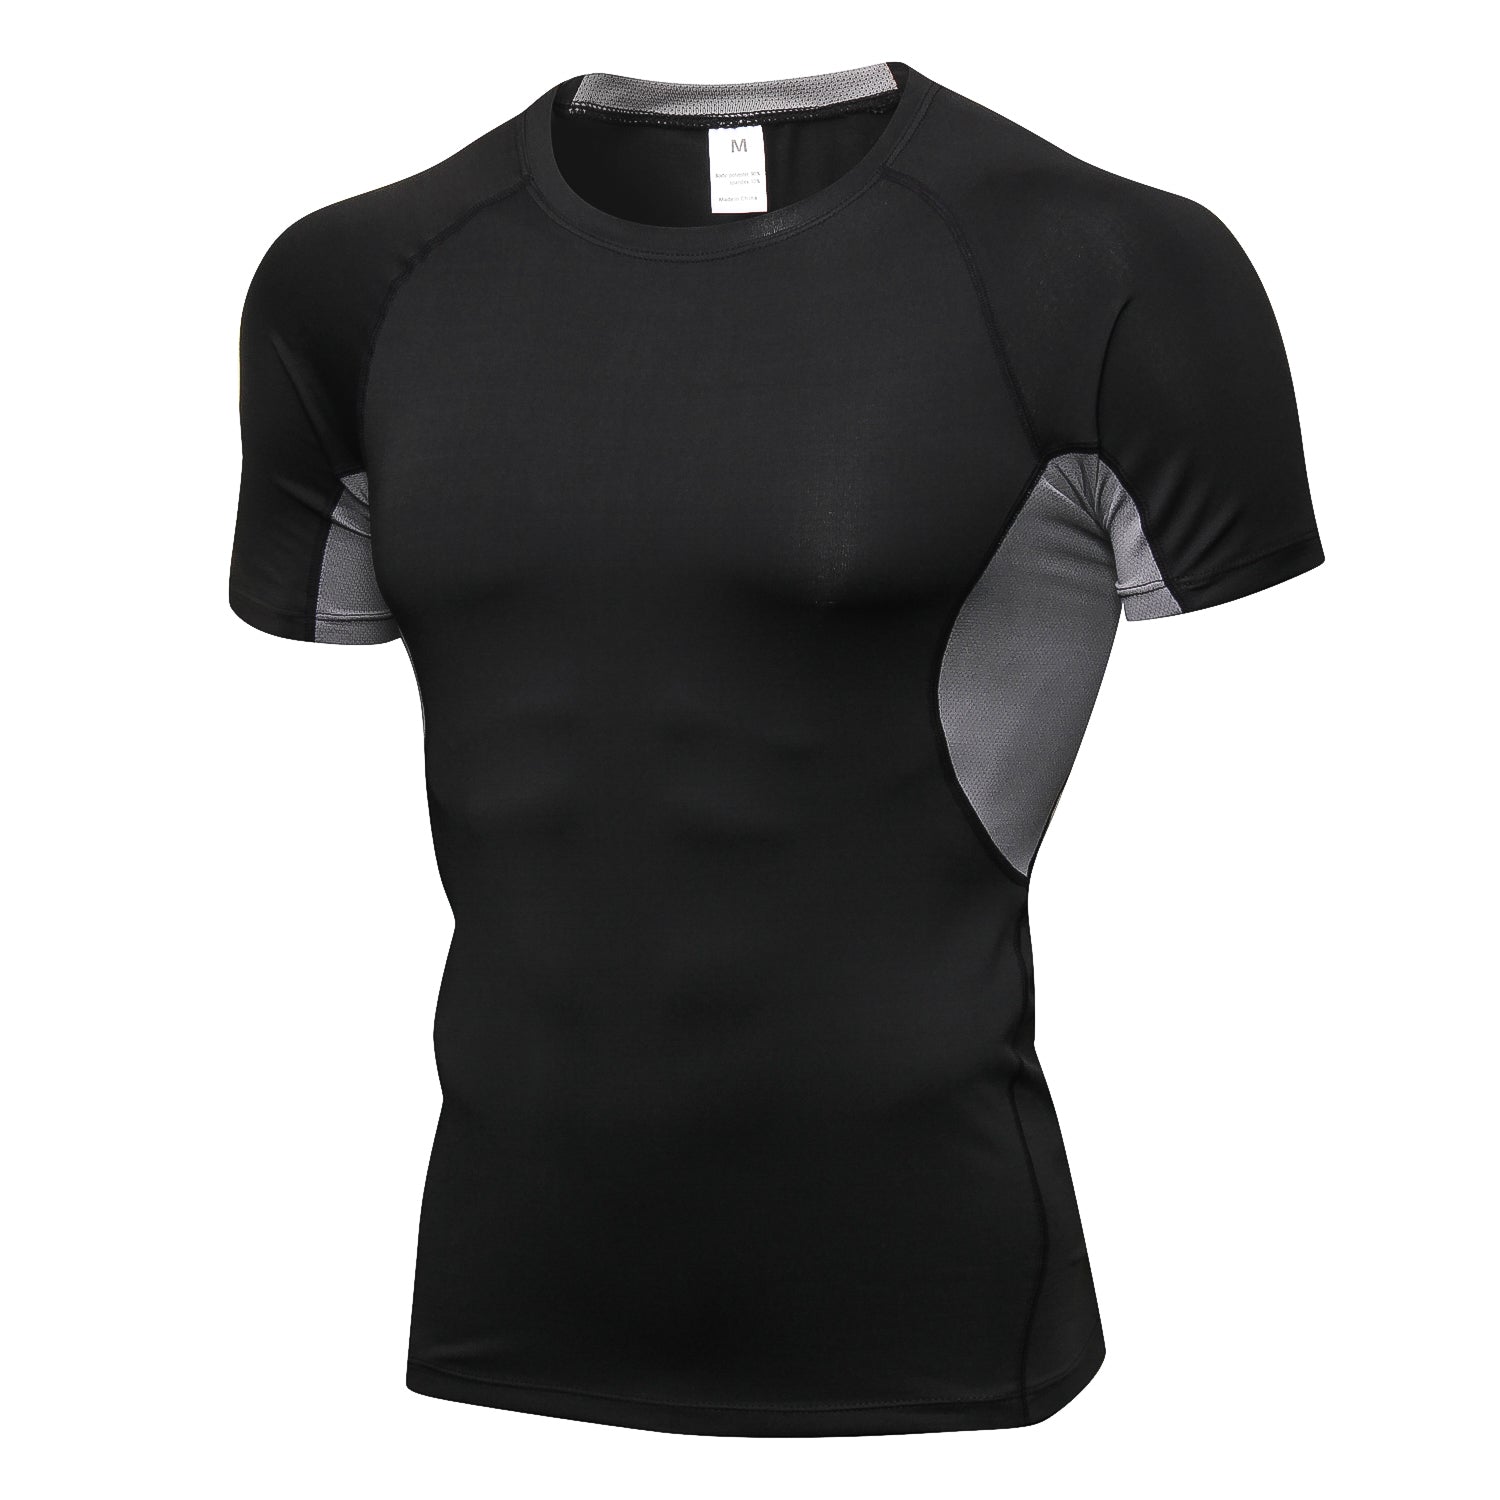 Men Compression Shirt Lightweight Breathable Cool Dry Moisture Wicking Workout Active Shirts LANBAOSI